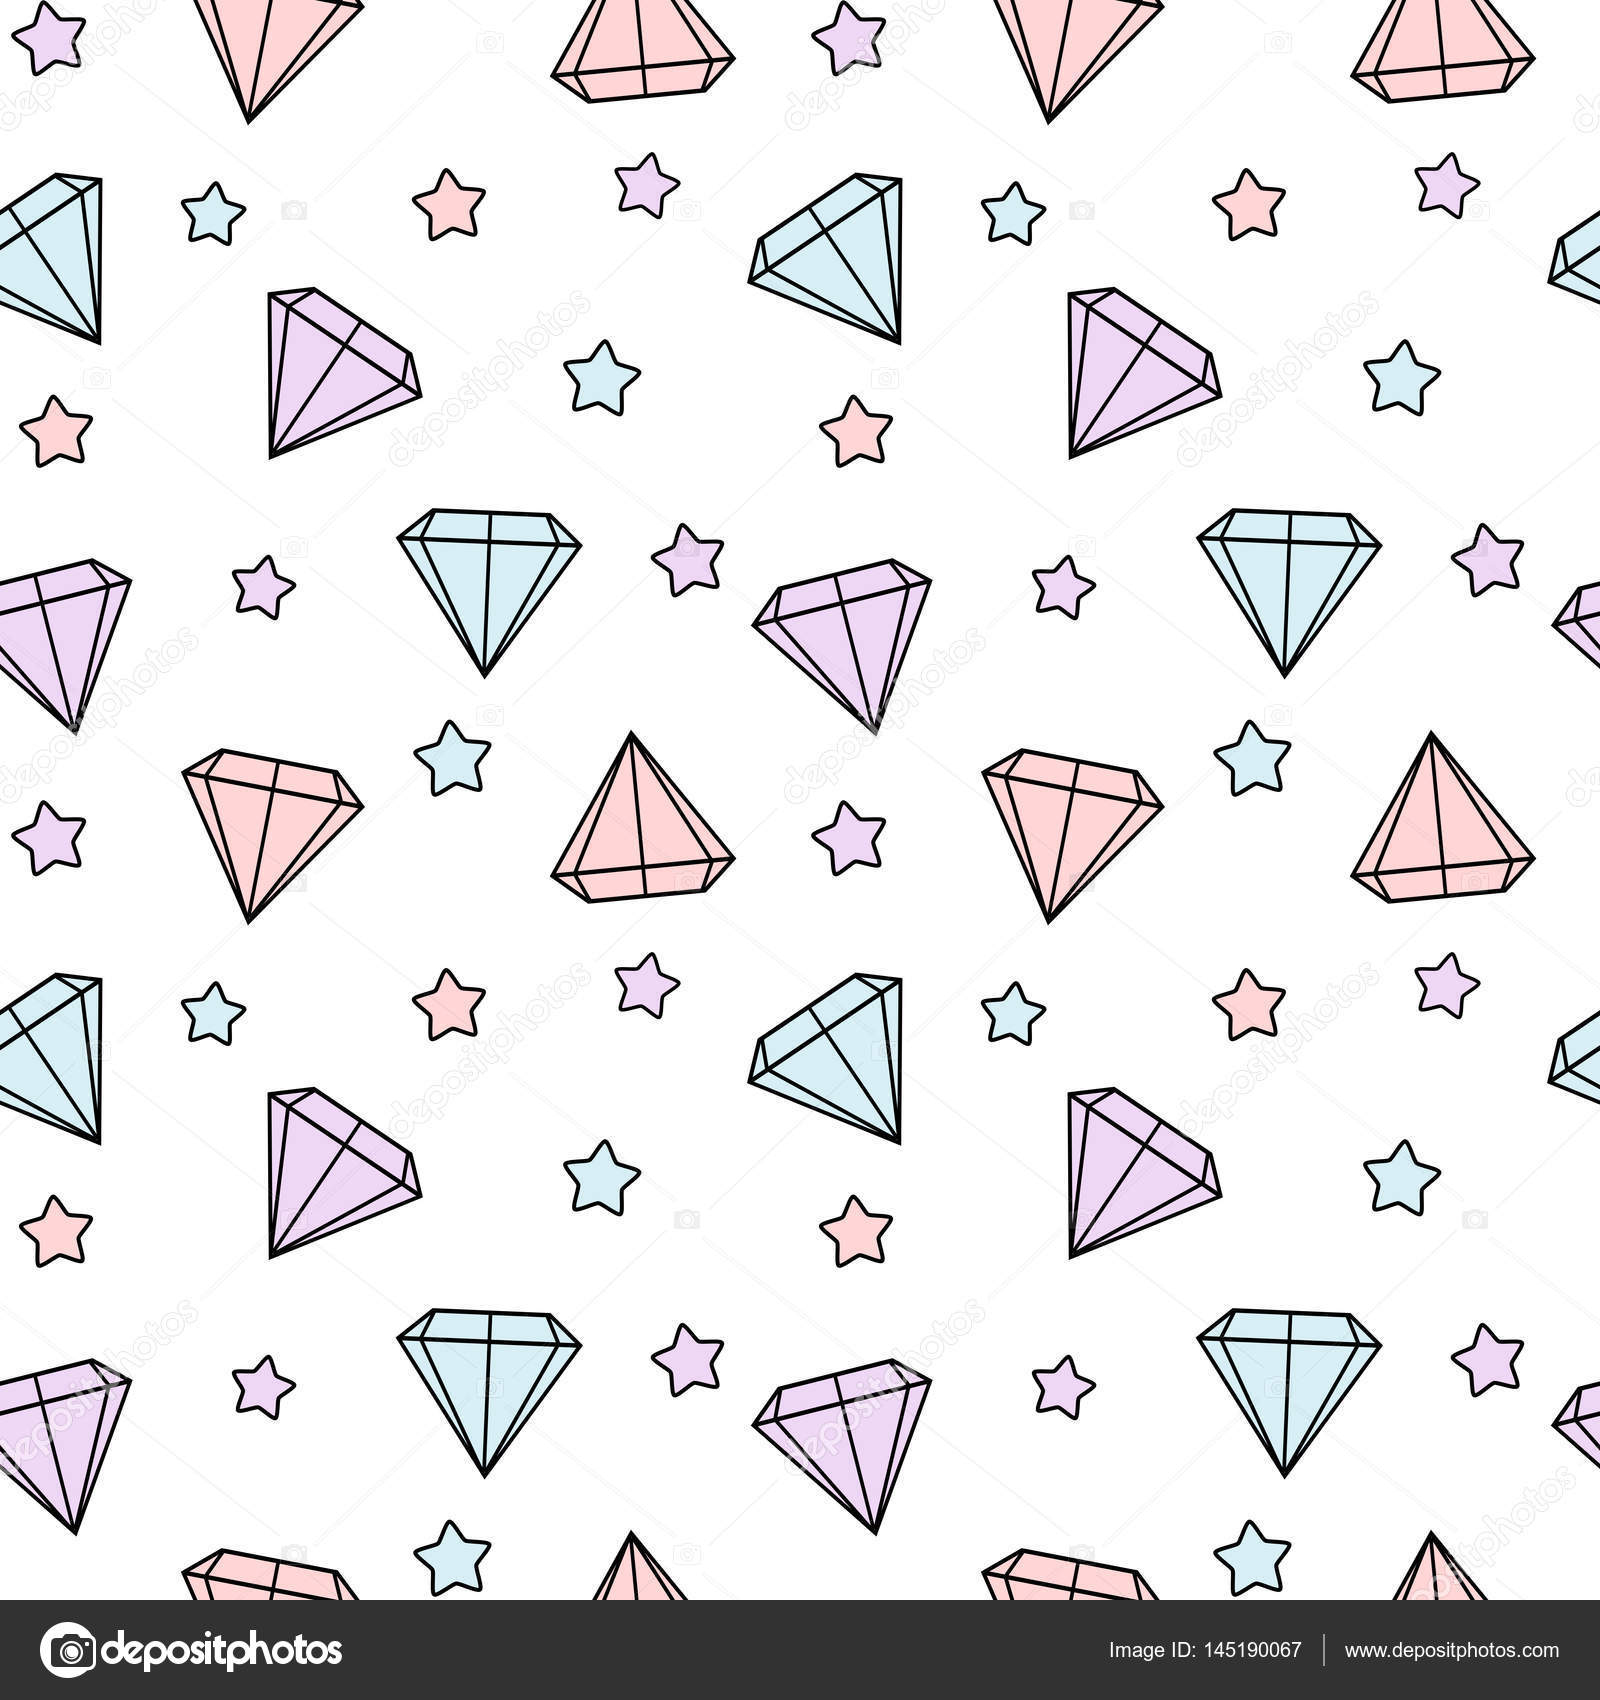 Cute Colorful Diamonds And Stars Seamless Vector Pattern Background Illustration Stock Vector Image By C Alicev1978